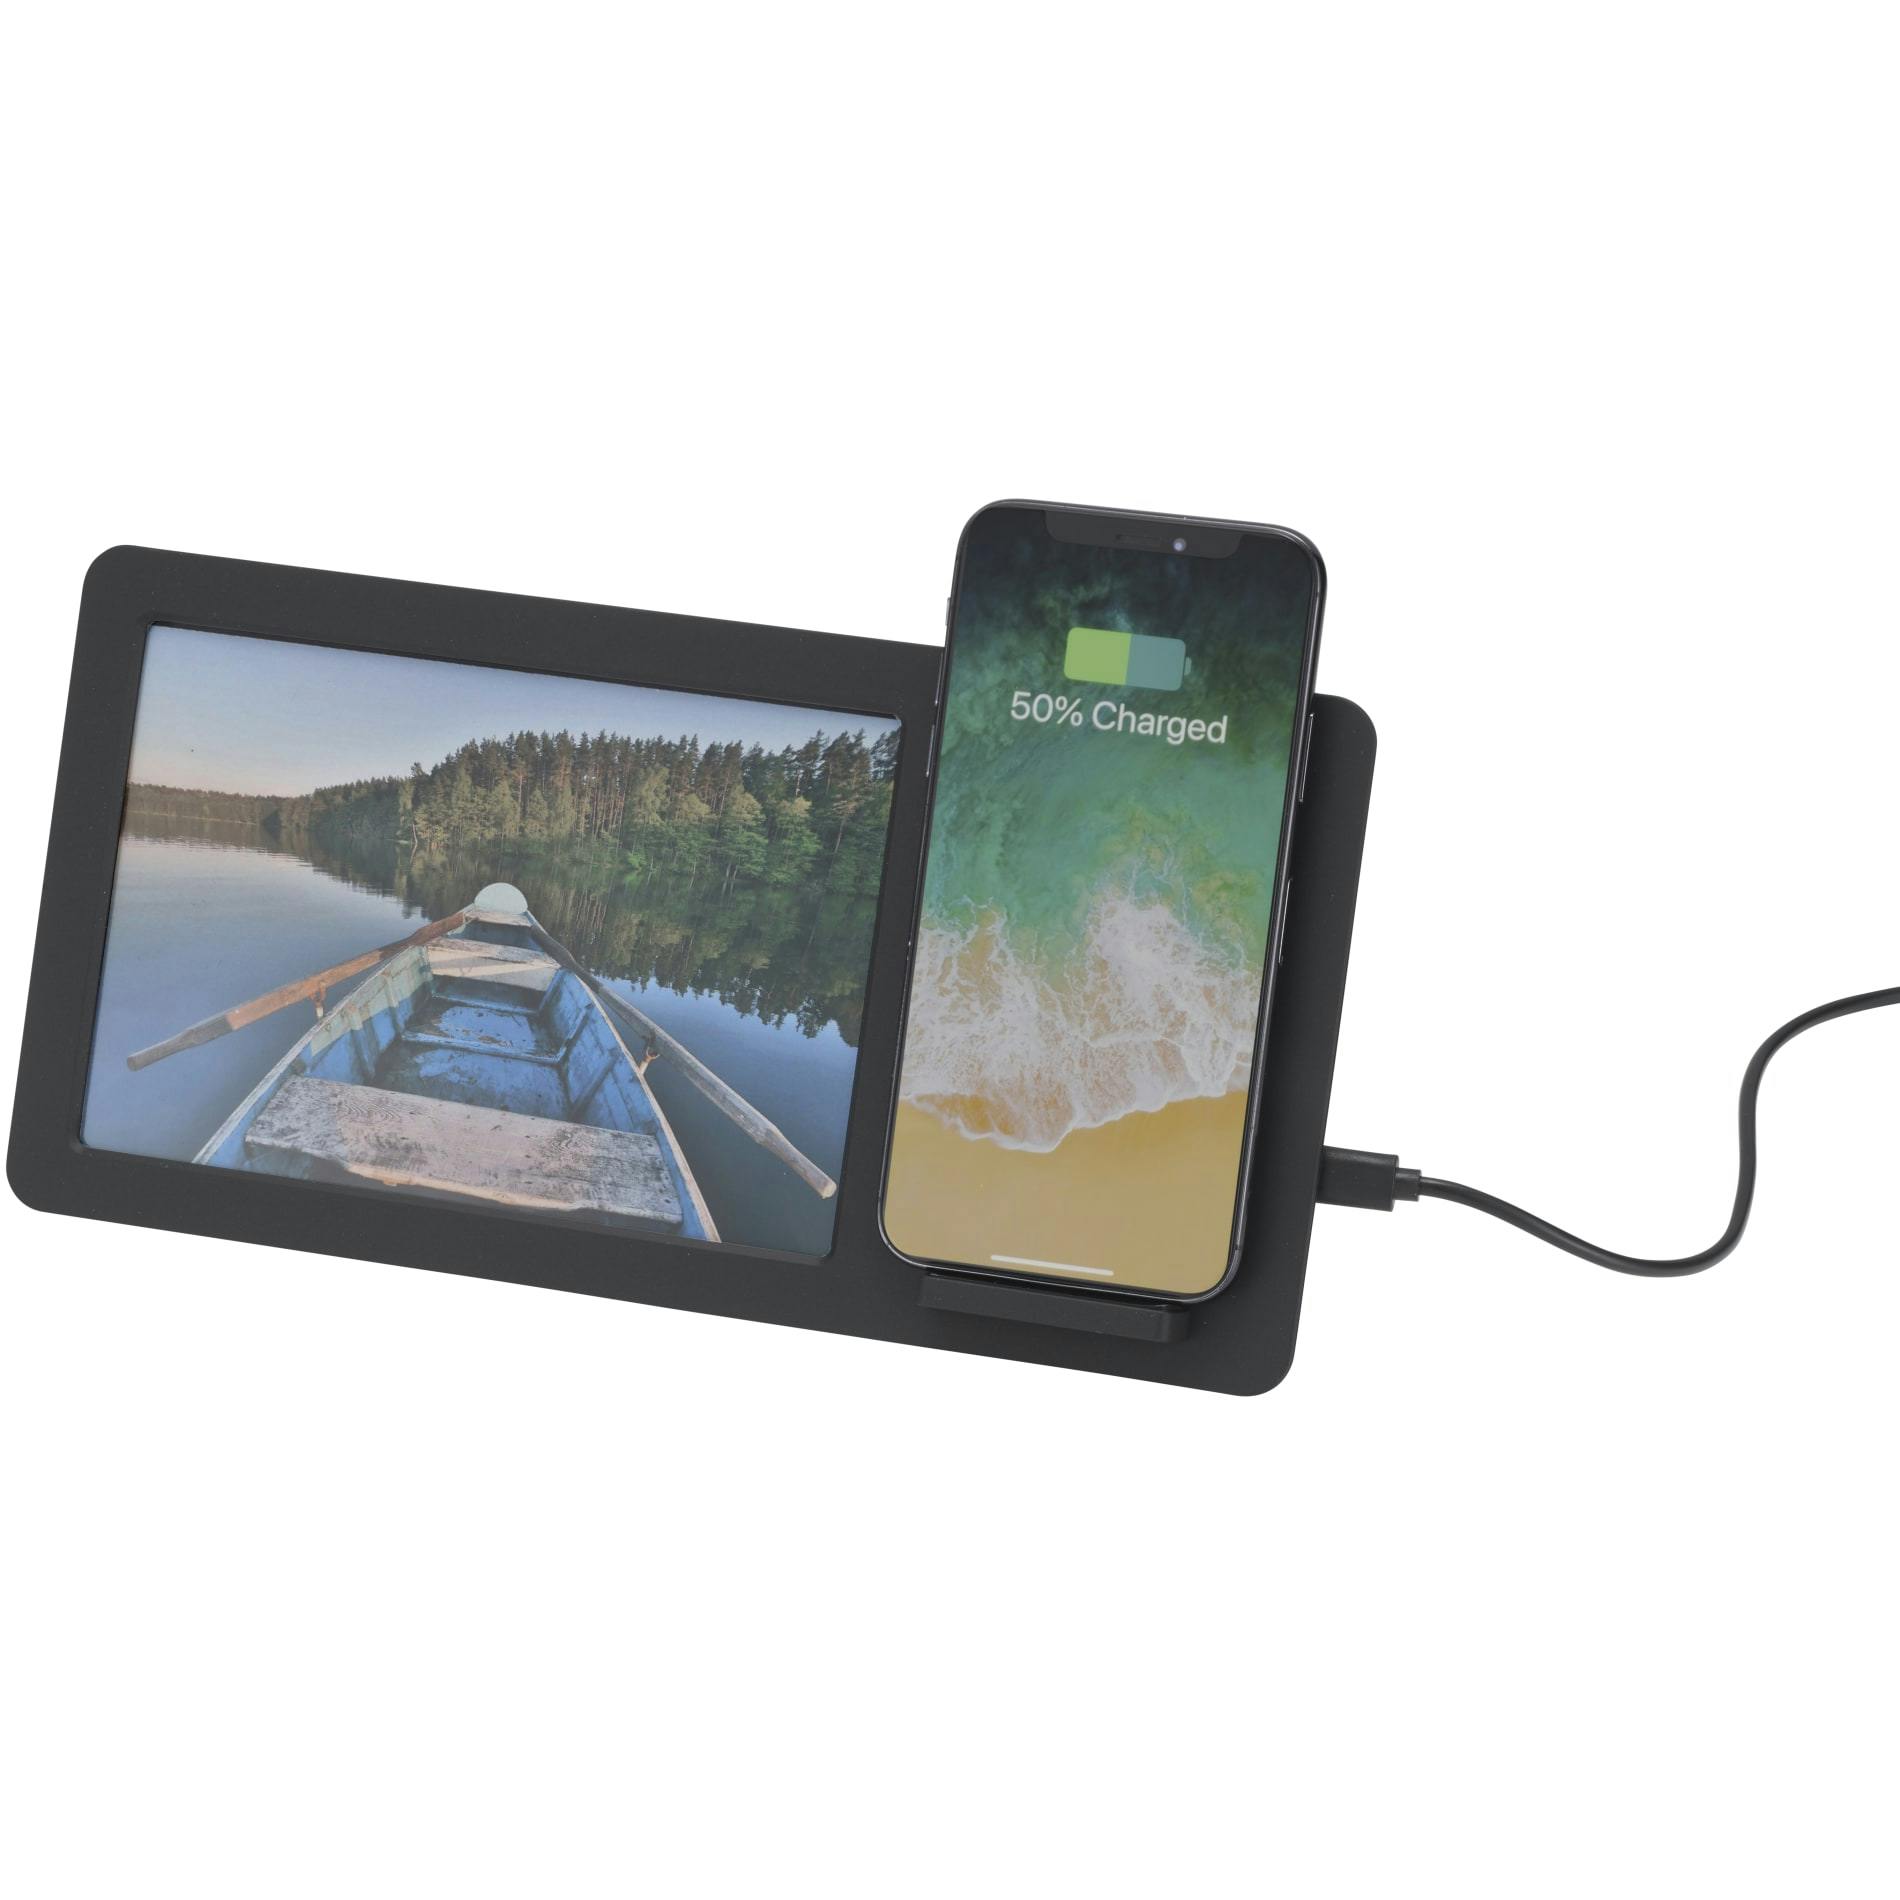 Glimpse Photo Frame with Wireless Charging Pad - additional Image 9